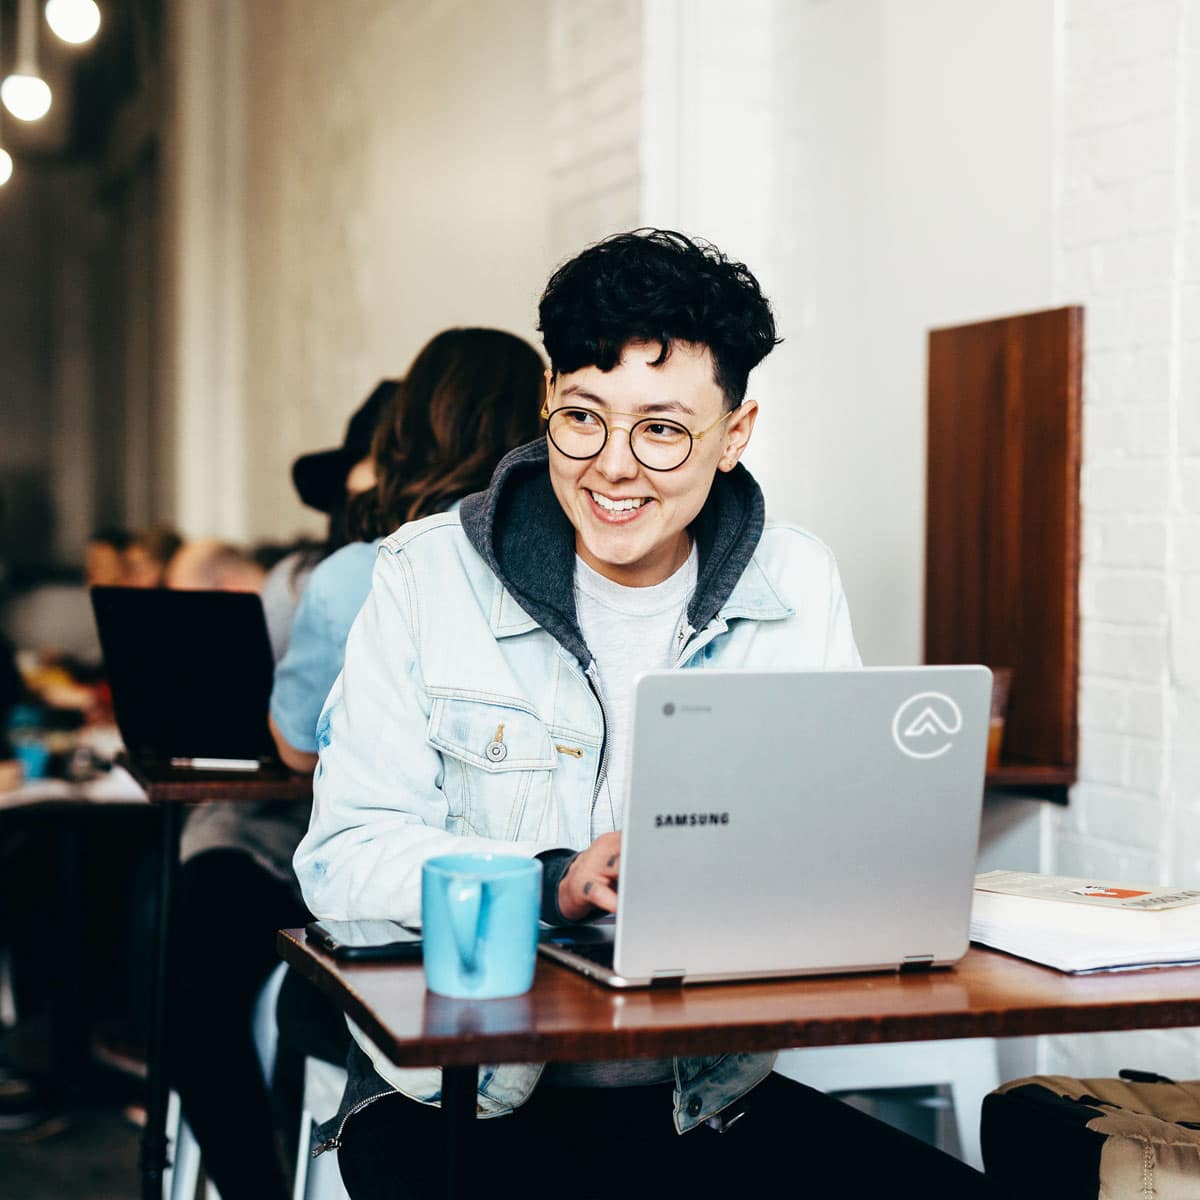 Young man smiling while on a laptop in a coffee shop